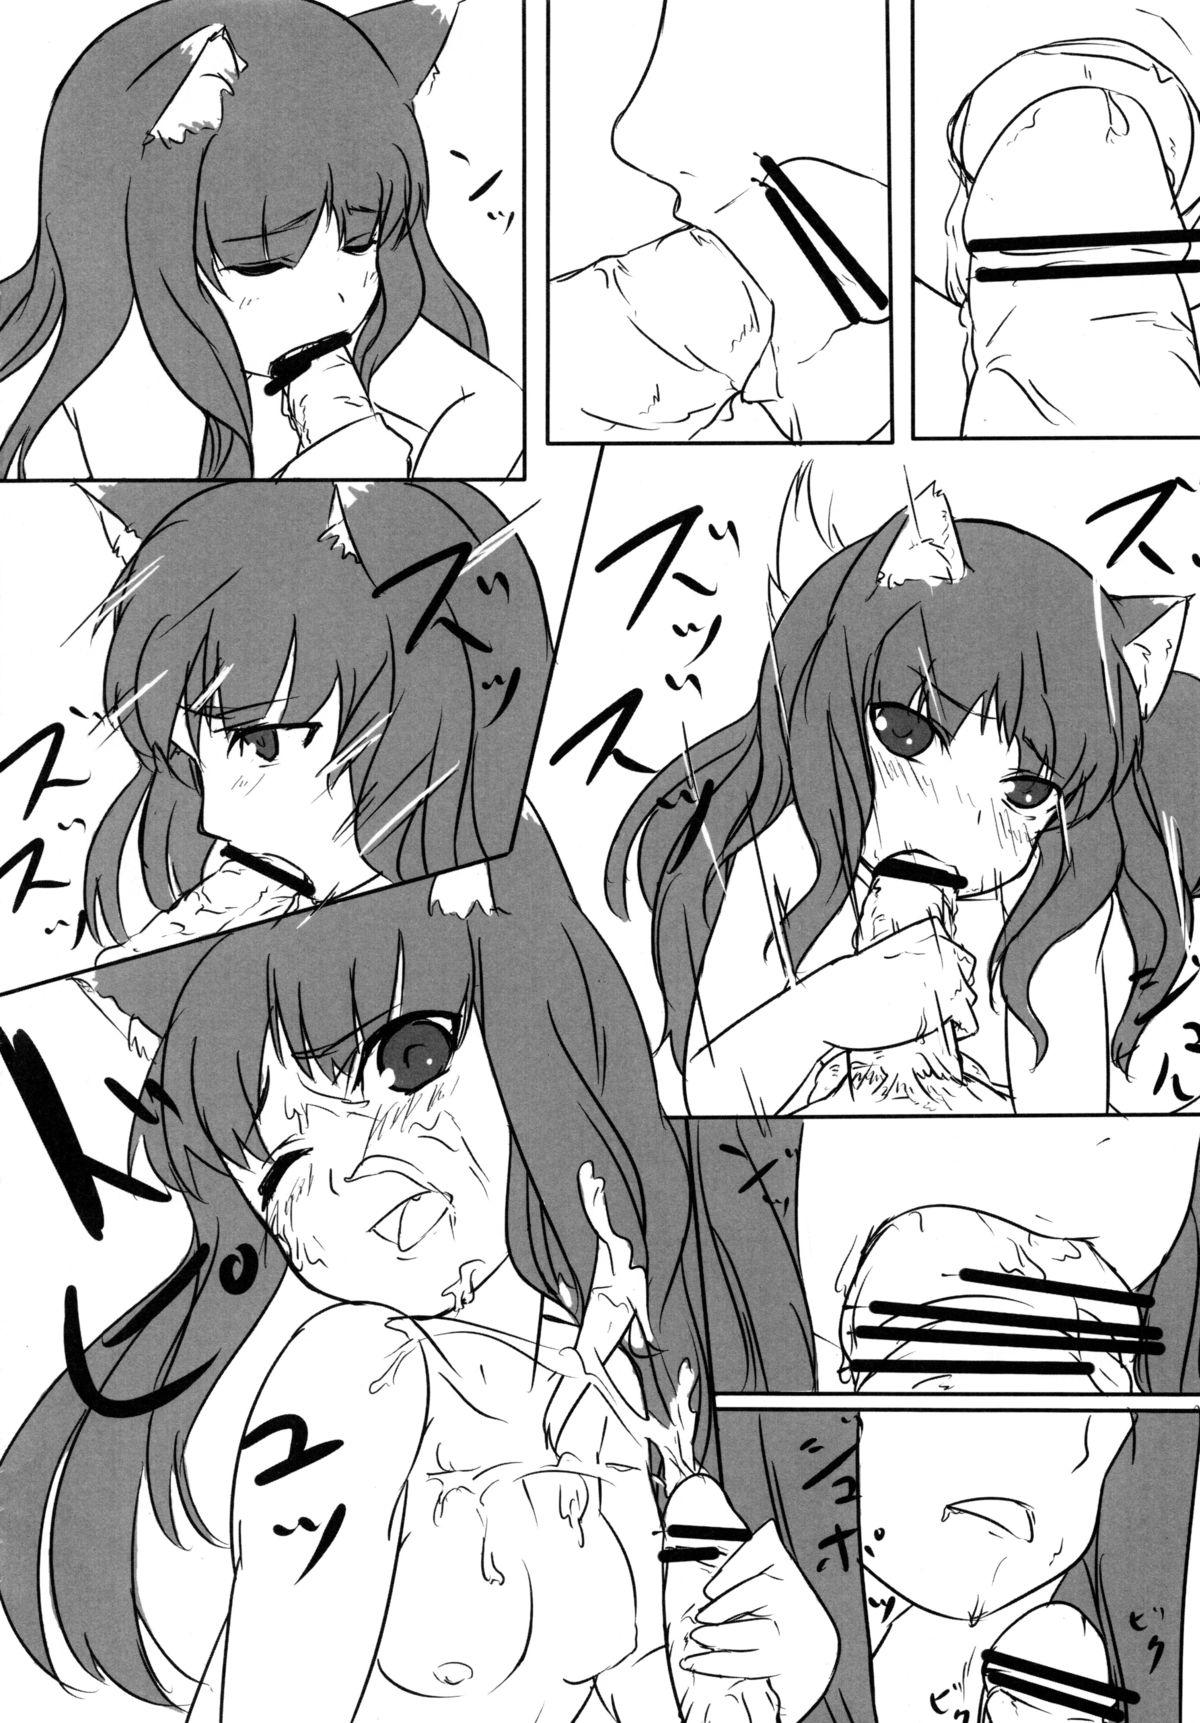 Pain Ookamito Koushinryou IIKB - Spice and wolf Parties - Page 10